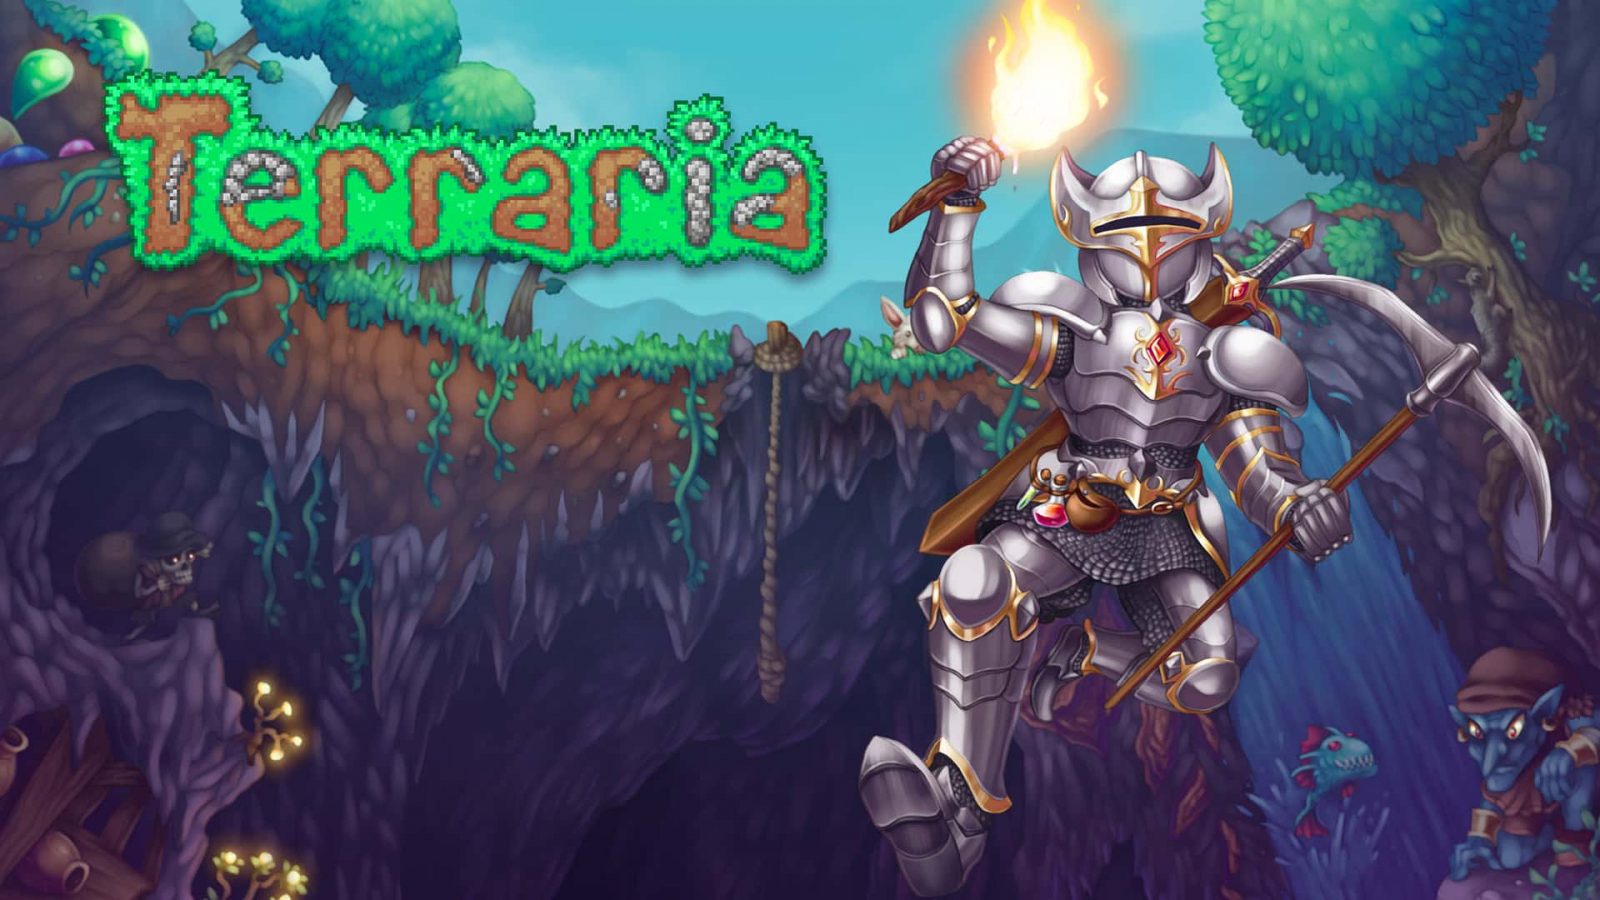 How to download Terraria's Calamity mod